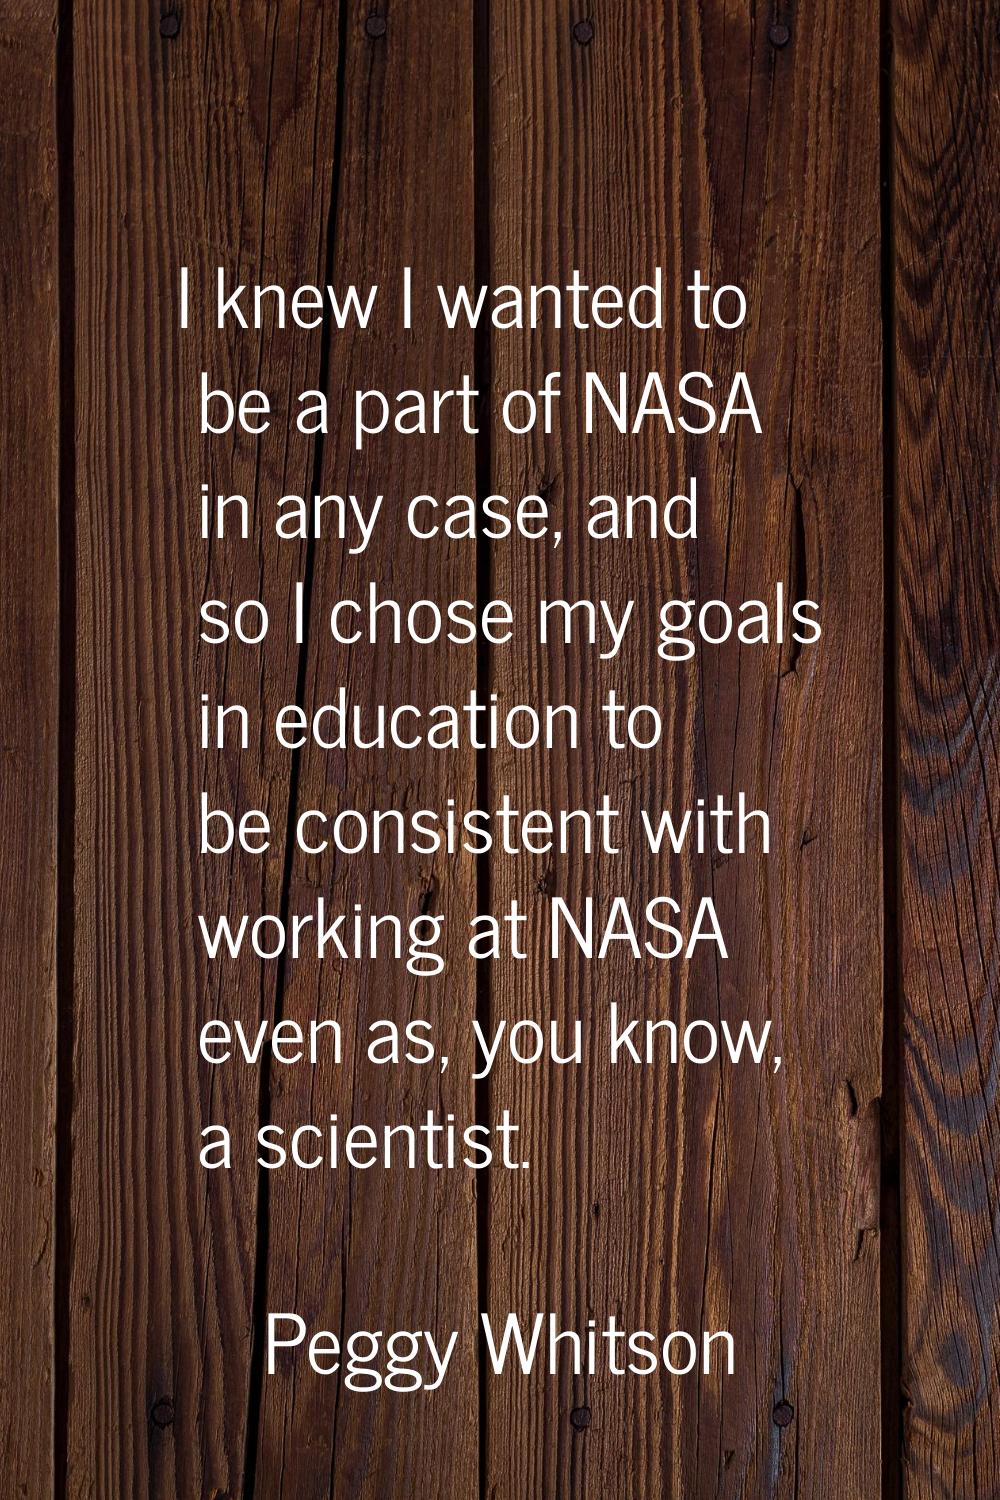 I knew I wanted to be a part of NASA in any case, and so I chose my goals in education to be consis